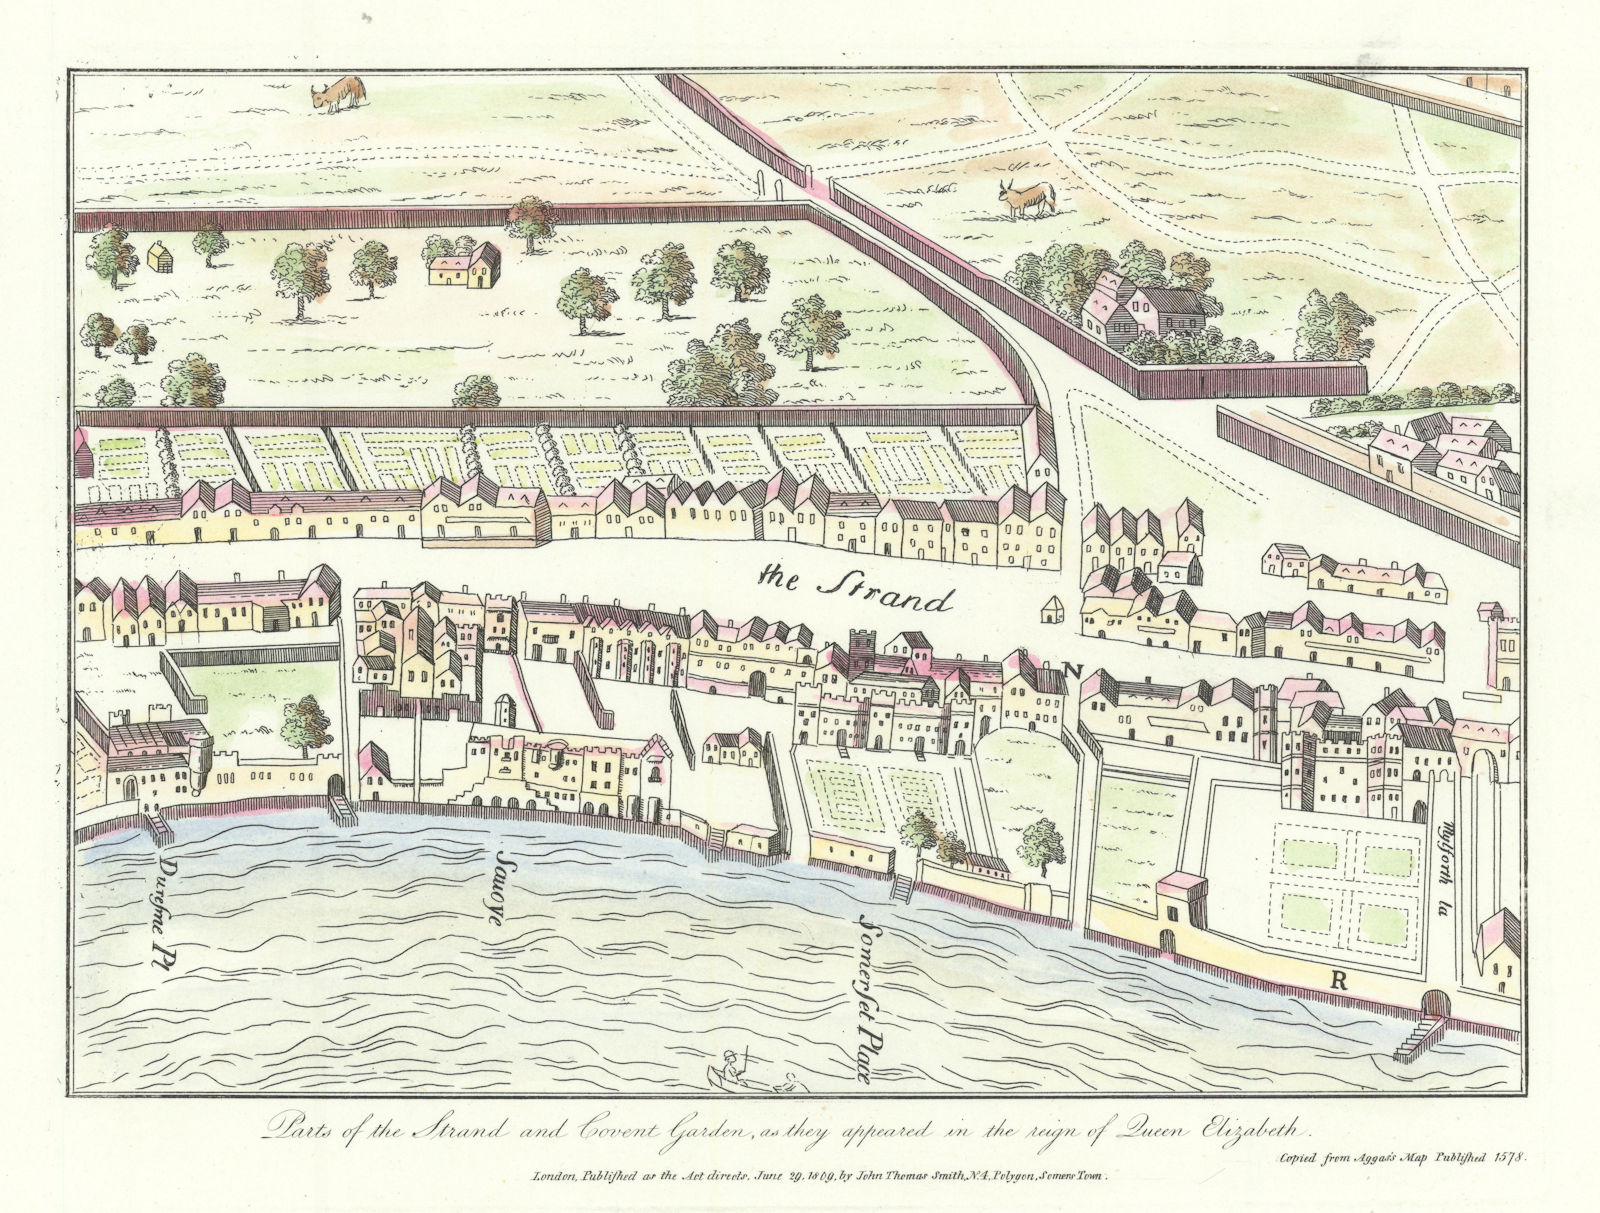 Associate Product The original walled Covent Garden & Strand from Agas 1578 map J.T. SMITH 1809